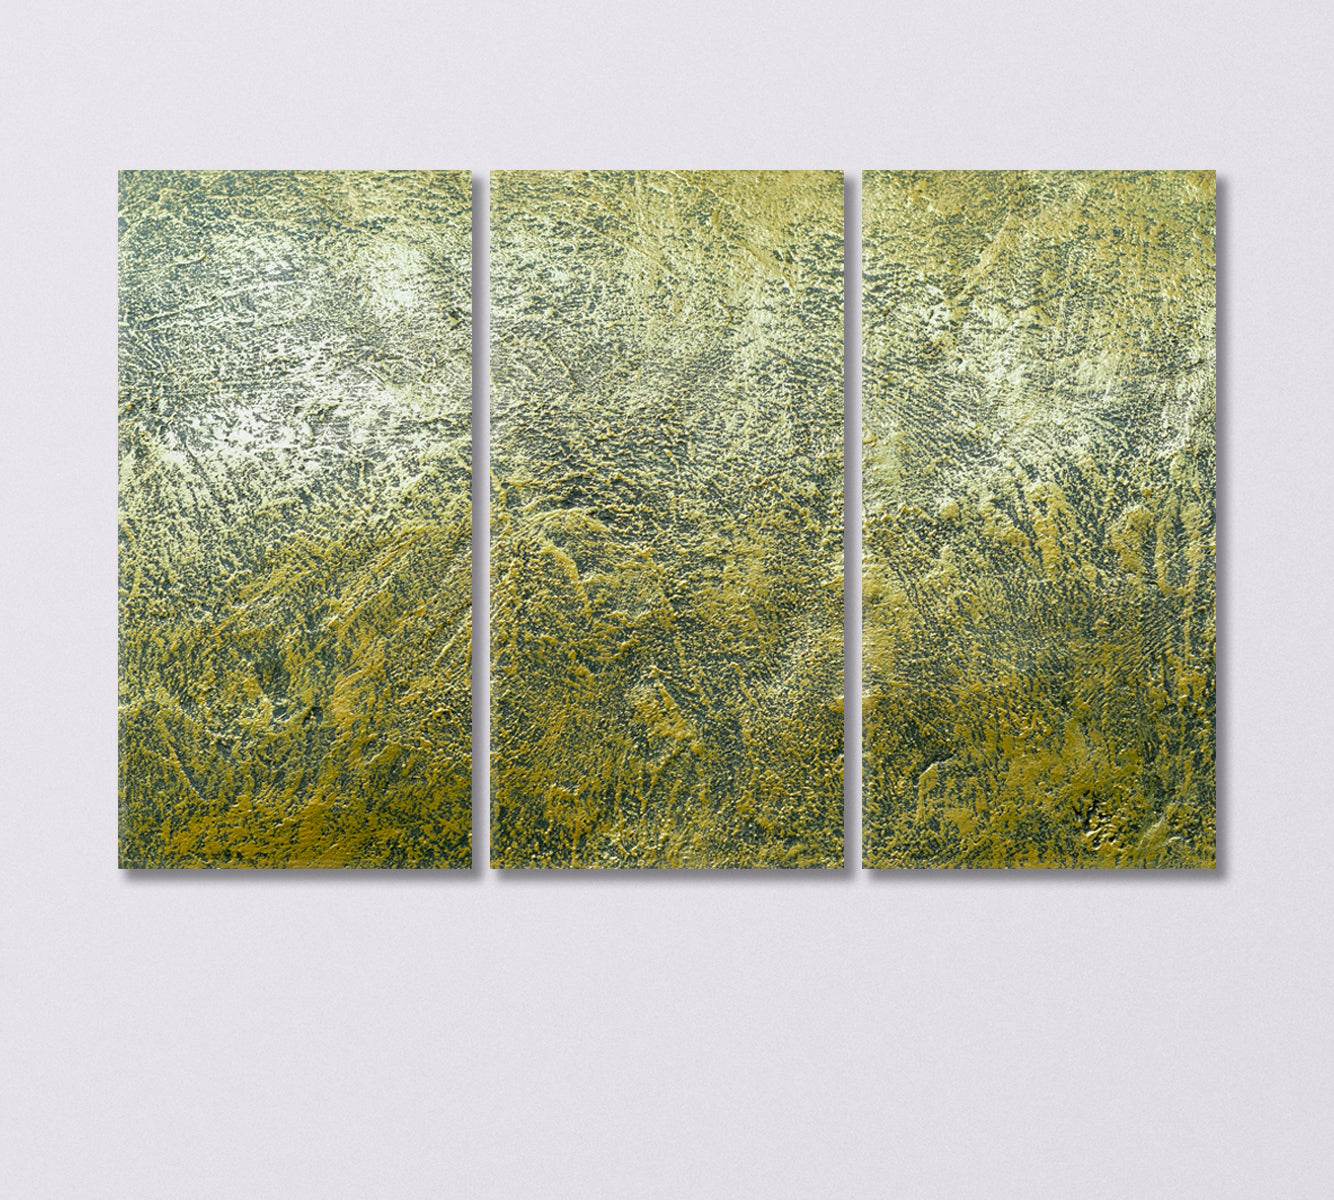 Marble with Bronze Plating Canvas Print-Canvas Print-CetArt-3 Panels-36x24 inches-CetArt